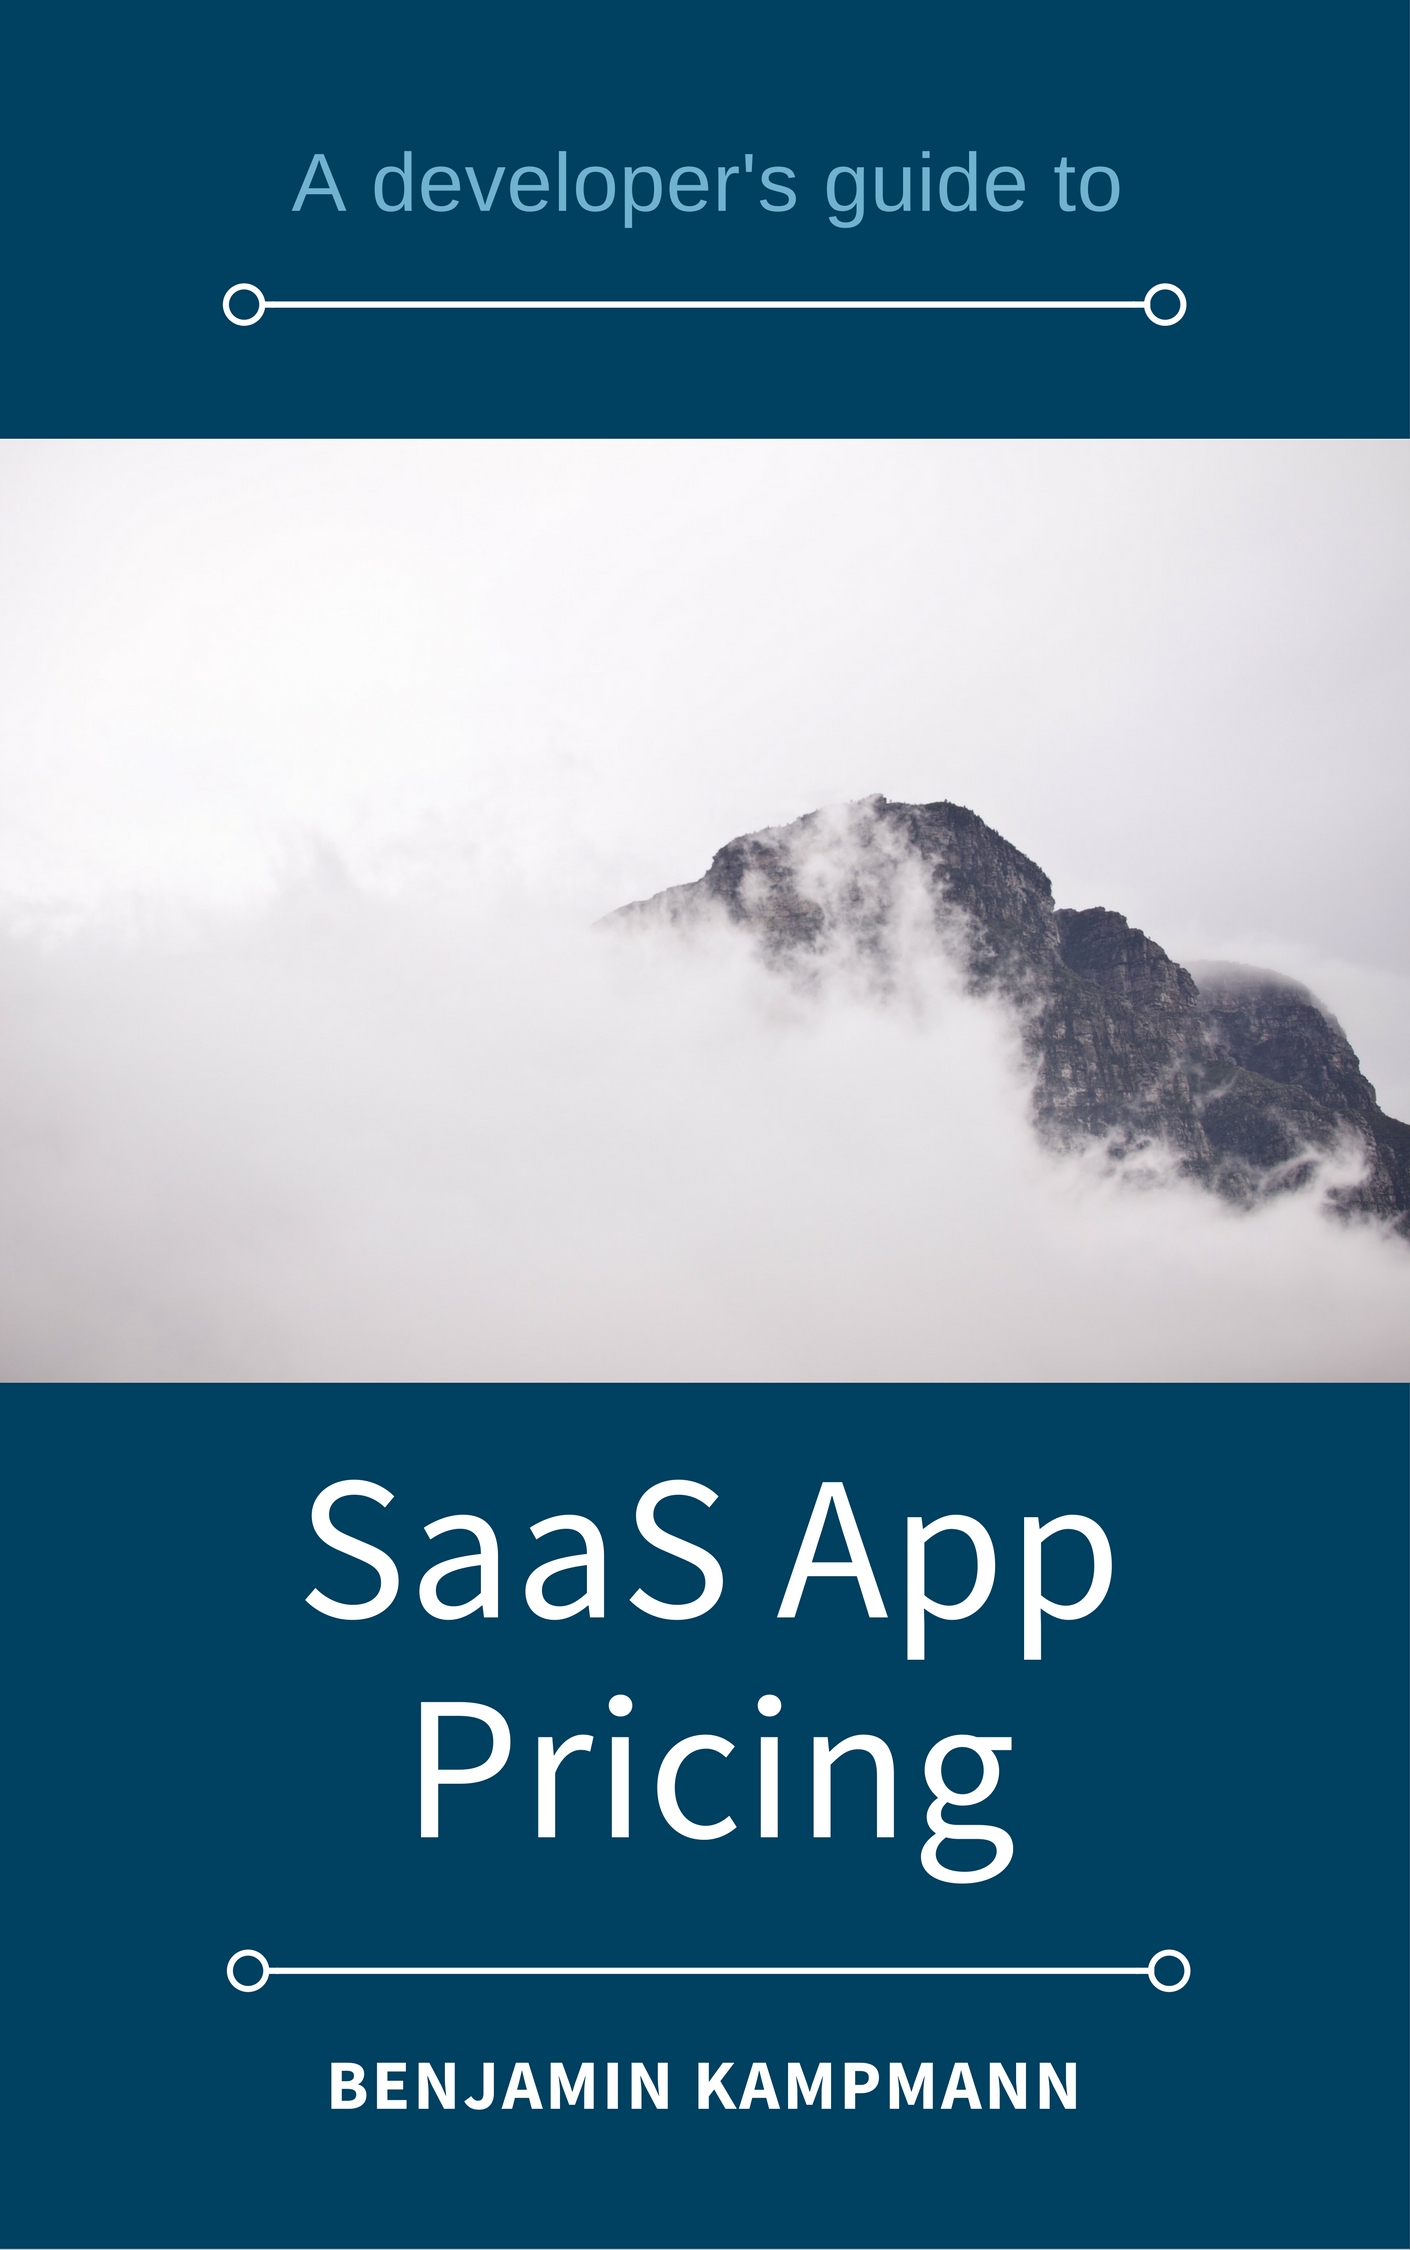 A developer's guide to SaaS App Pricing